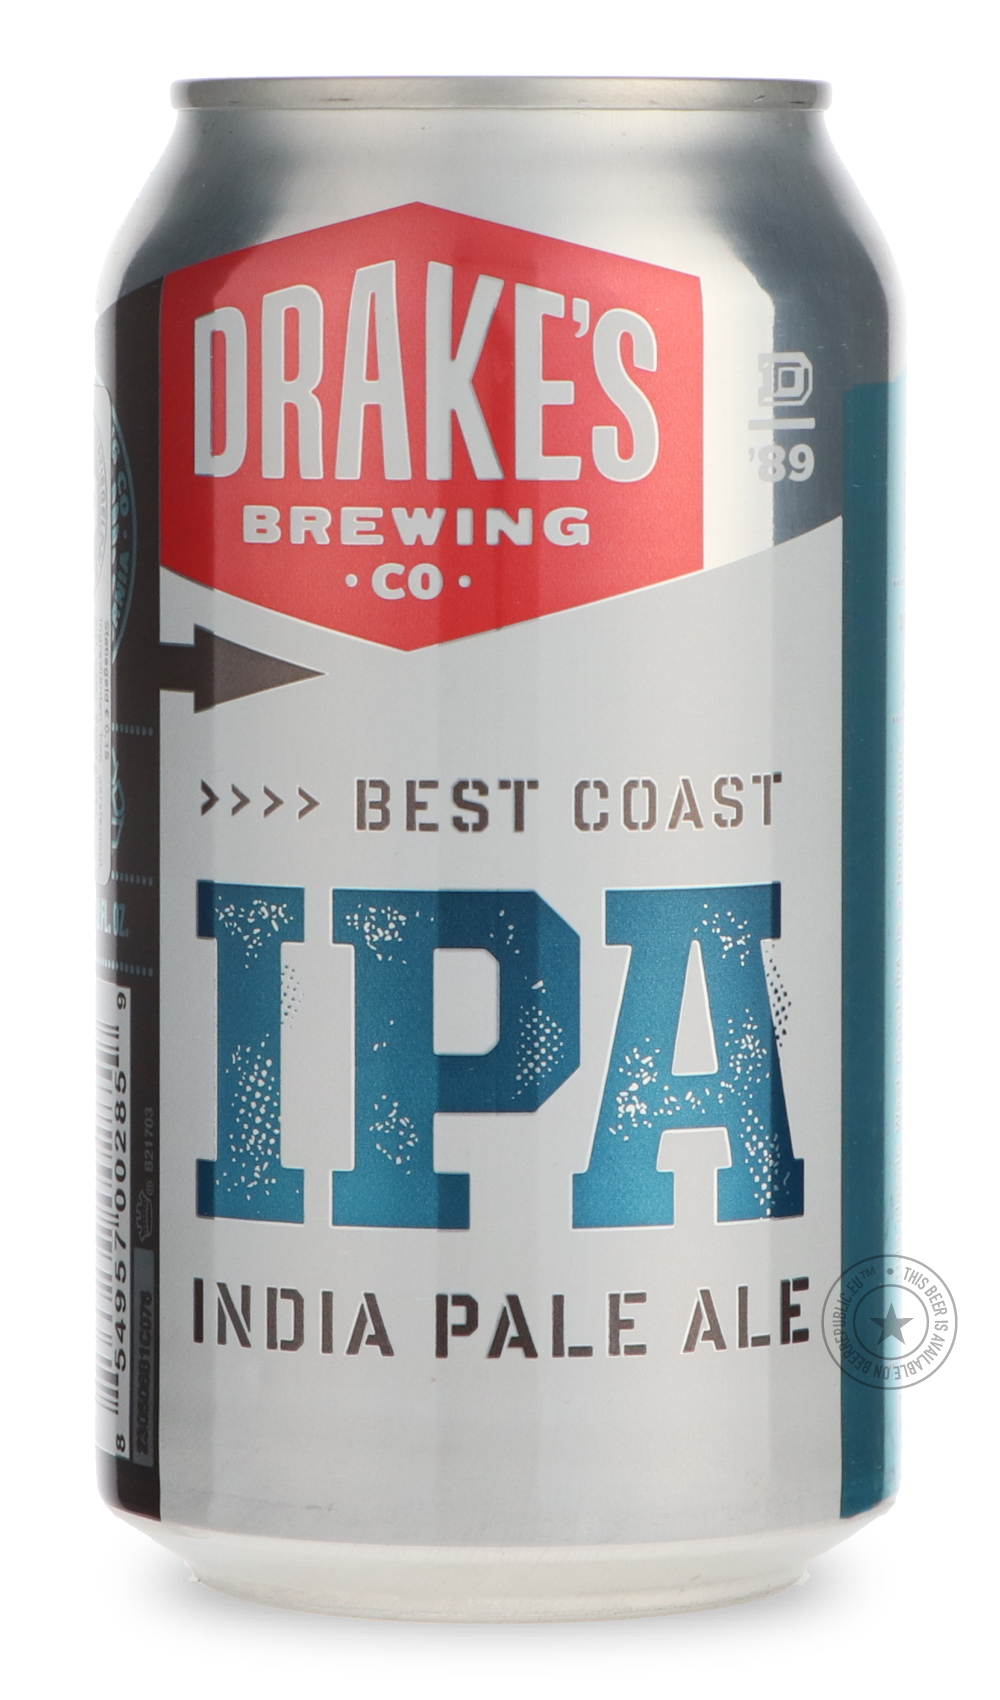 -Drake's- Best Coast IPA-IPA- Only @ Beer Republic - The best online beer store for American & Canadian craft beer - Buy beer online from the USA and Canada - Bier online kopen - Amerikaans bier kopen - Craft beer store - Craft beer kopen - Amerikanisch bier kaufen - Bier online kaufen - Acheter biere online - IPA - Stout - Porter - New England IPA - Hazy IPA - Imperial Stout - Barrel Aged - Barrel Aged Imperial Stout - Brown - Dark beer - Blond - Blonde - Pilsner - Lager - Wheat - Weizen - Amber - Barley W